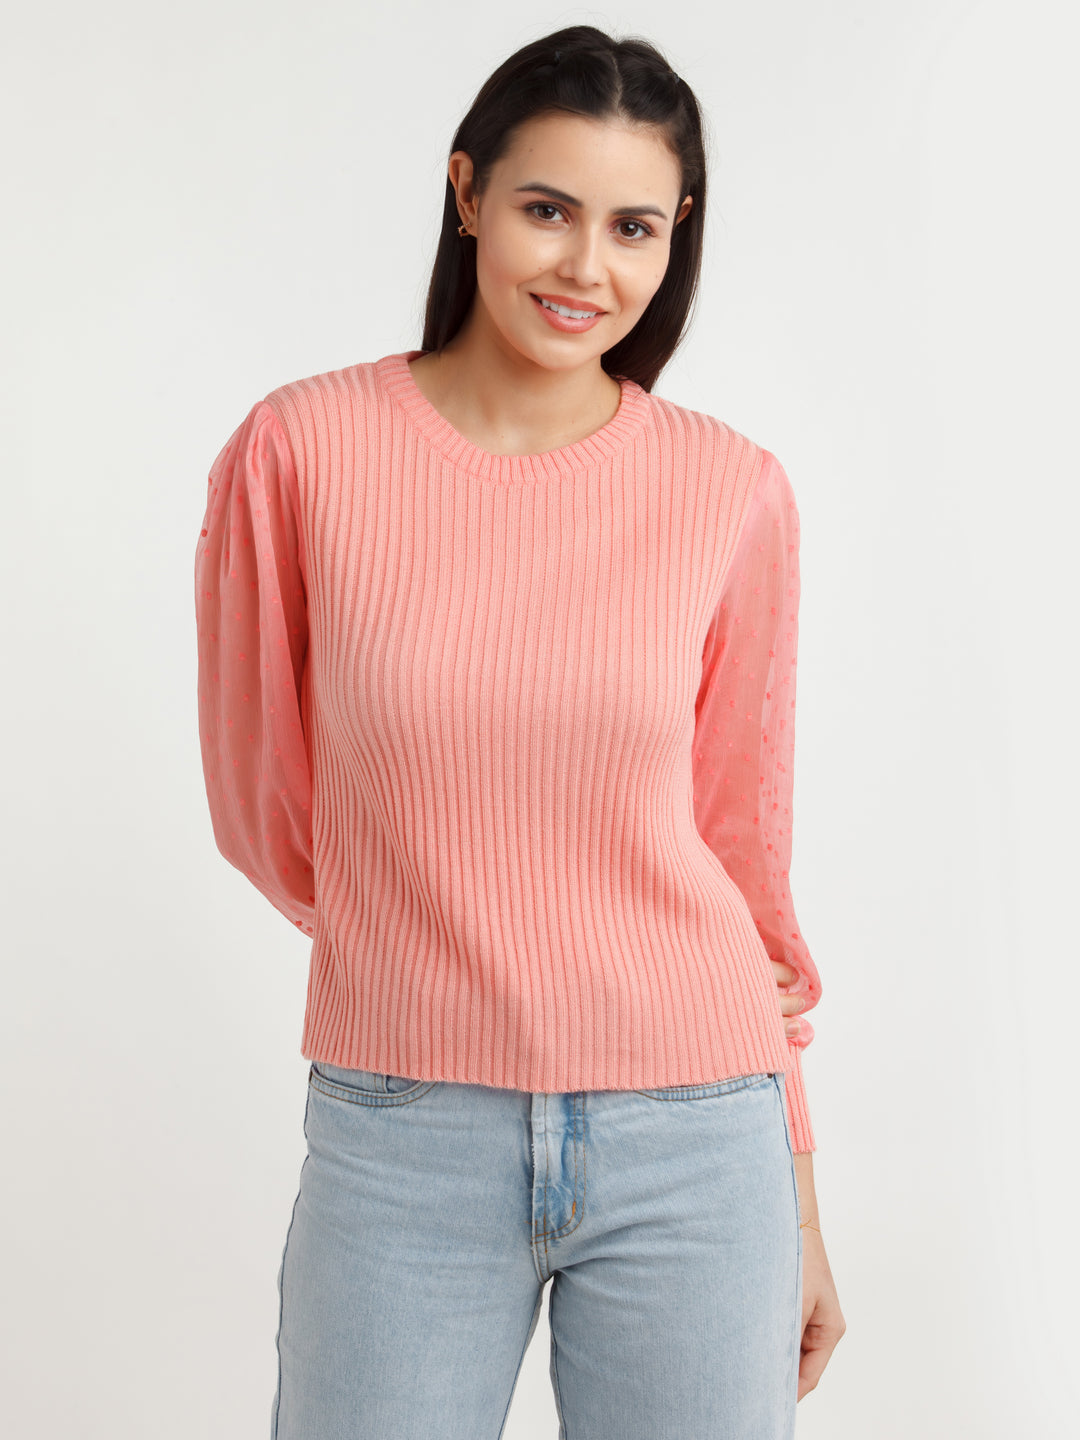 Coral Solid Sweater For Women